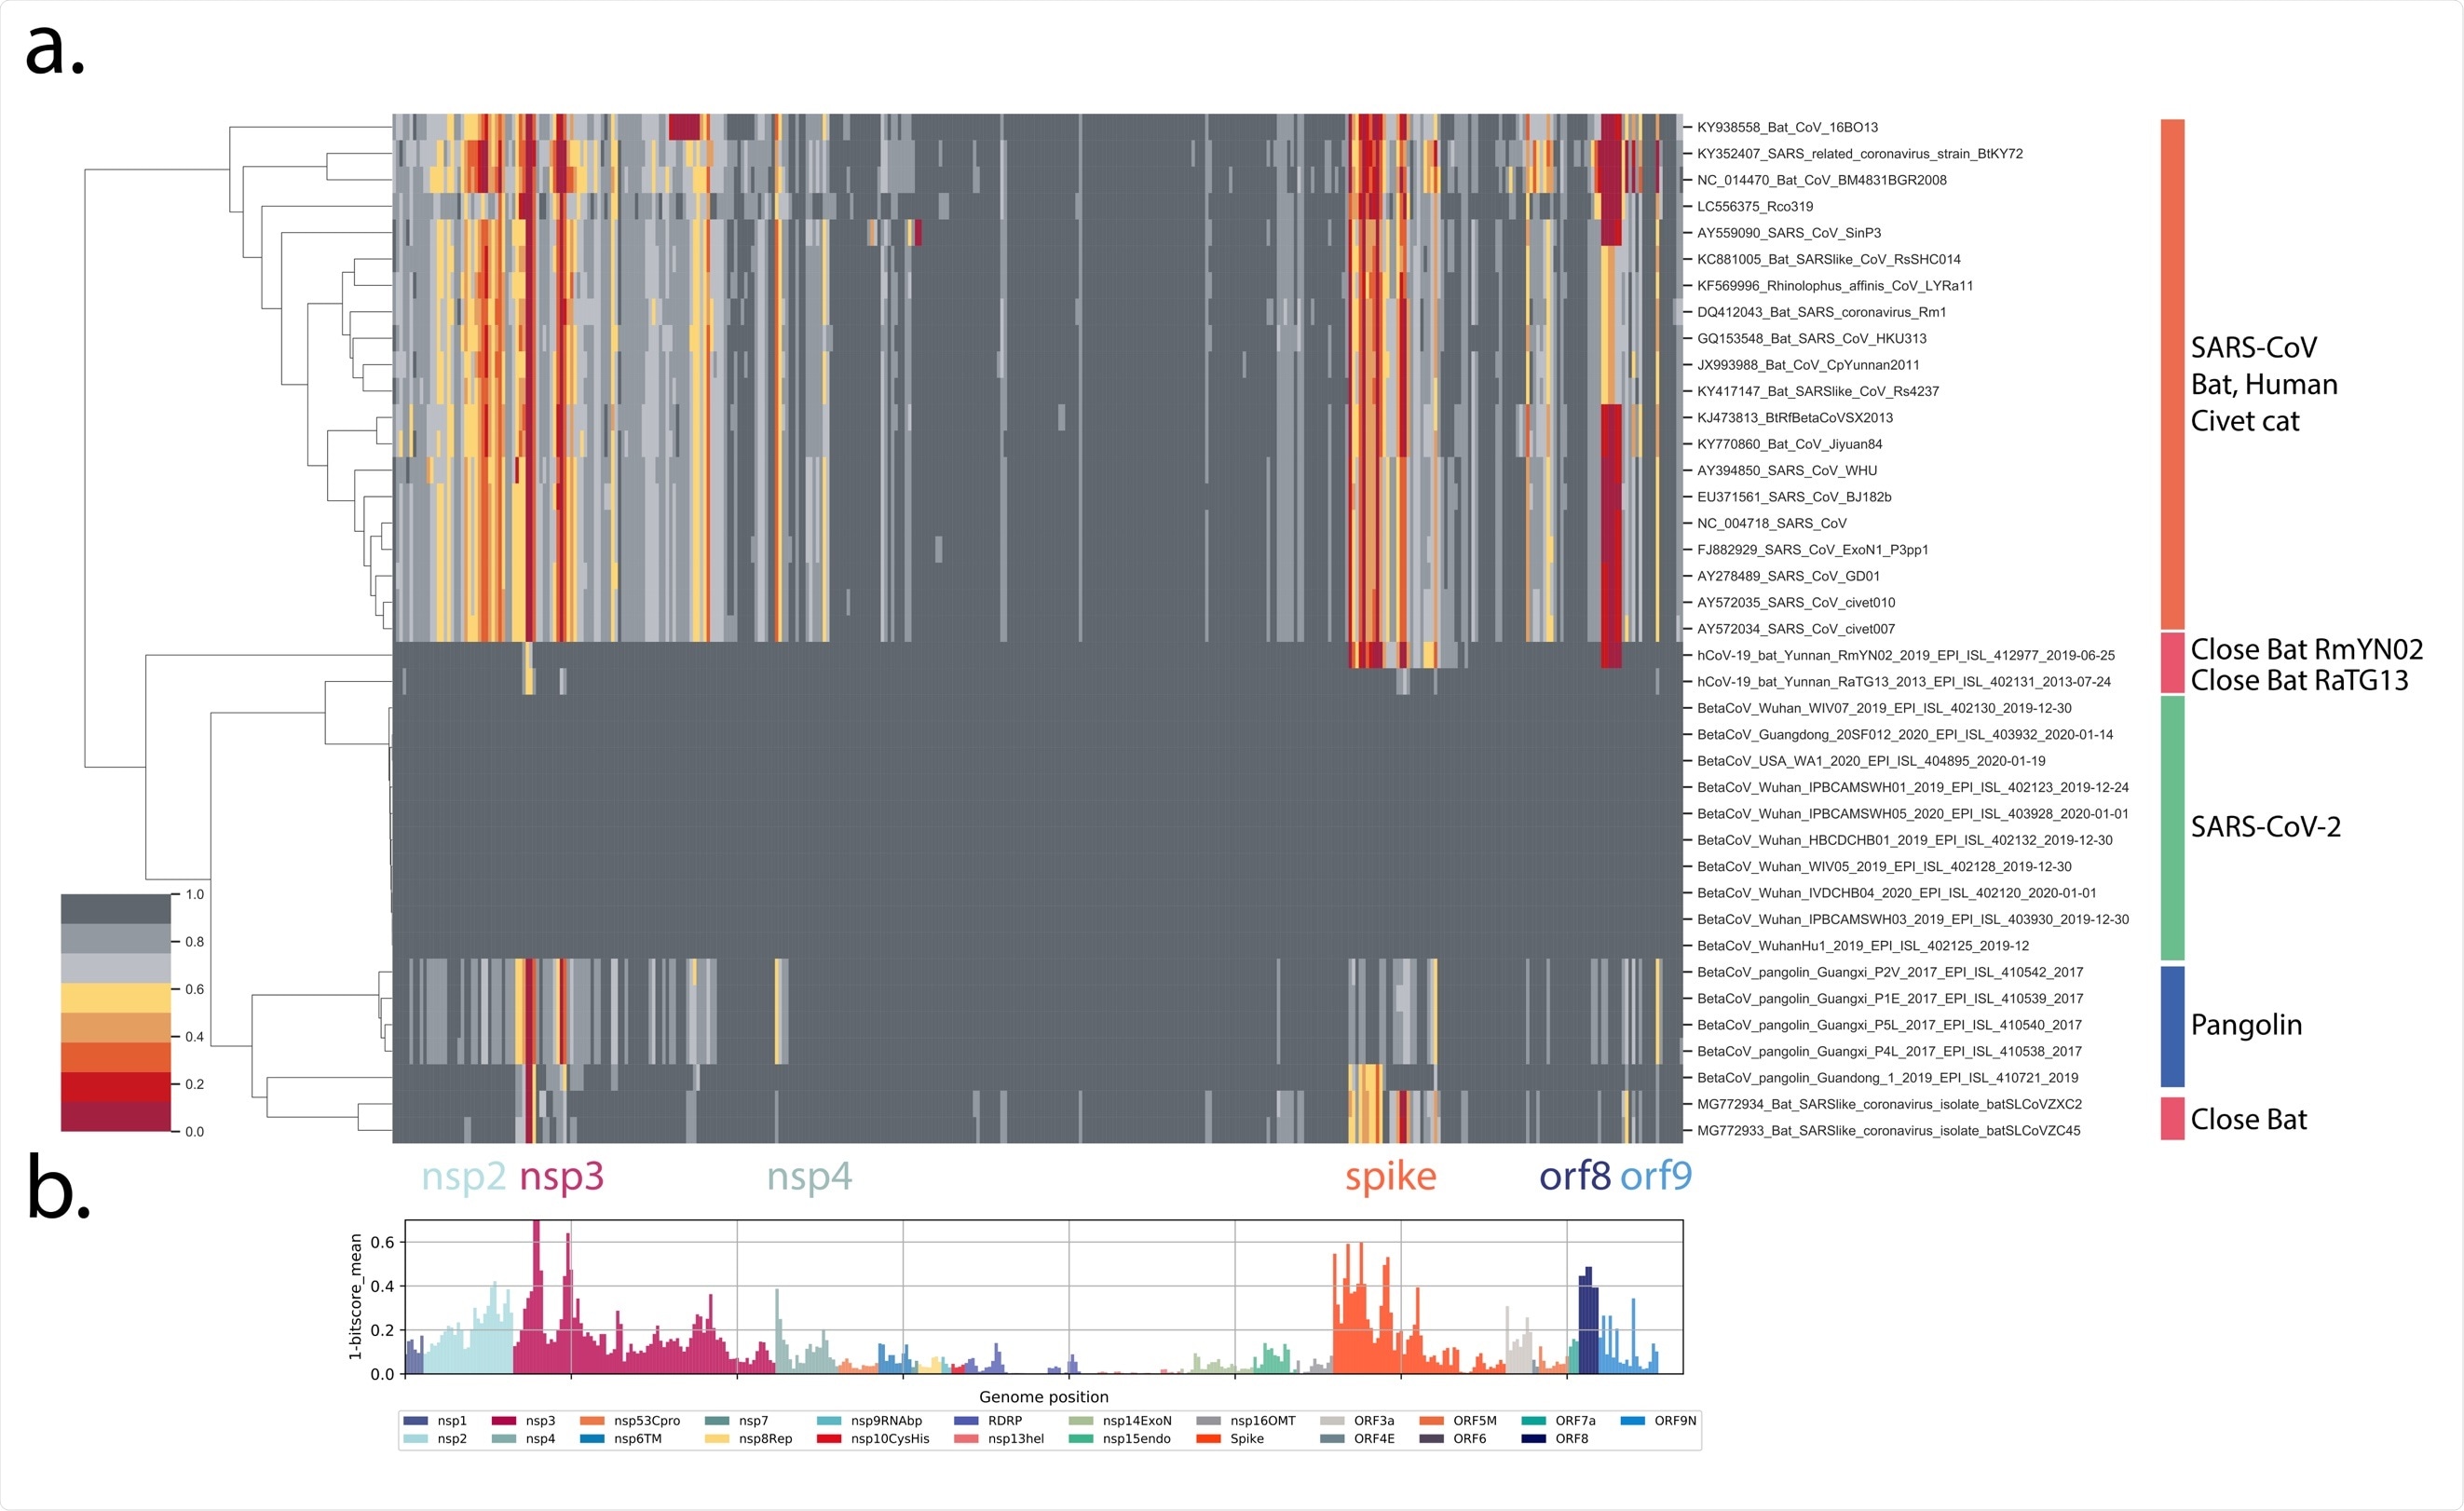 Proteome differences in SARS-CoV-2 vs close Bat, Human and Civet cat Sarbecoviruses. All forward open reading frames from the 35 early lineage B SARS-CoV-2 genomes were translated, and processed into 44 aa peptides (with 22 aa overlap), clustered at 0.65 identity using Uclust (11), aligned with MAAFT (12) and converted into pHMMs using HMMER-3 (10). The presence of these domains was sought in a set of Sarbecovirus genomes plus the SARS-CoV-2 genomes and genomes were then clustered using hierarchical clustering based on the normalized domain bit-scores (e.g. the similarity of the identified query domain to the reference lineage B SARS-CoV-2 domain). Each row represents a genome, each column represents a domain. Domains are displayed in their order across the SARS-CoV-2 genome, Red = low normalized domain bit-score (lower similarity to lineage B SARS-CoV-2) = distant from SARS-CoV-2, Darkest grey = normalized domain bit-score = 1 = highly similar to lineage B SARS-CoV-2. Groups of coronaviruses were indicated to the right of the figure. (A) Domain differences across the Sarbecovirus subgenus. (B) For each domain the mean bit-score was calculated across the entire set of Sarbecovirus genomes and the value 1-mean bit-score was plotted for each domain. Domains are coloured by the proteins from which they were derived with the colour code indicated below the figure.